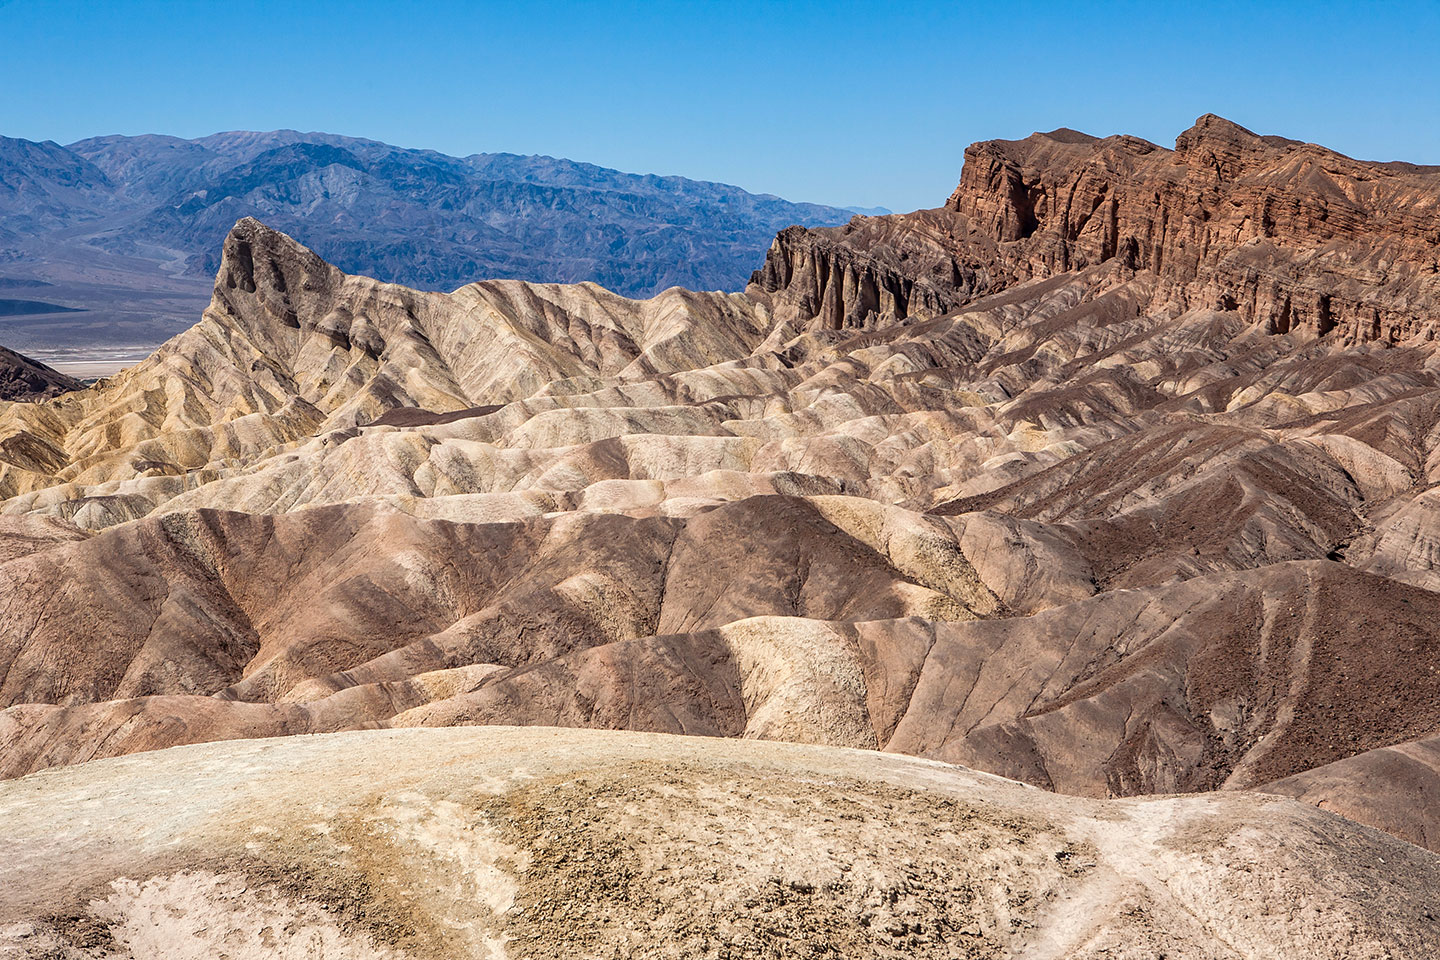 Rock formations in Death Valley National Park, California